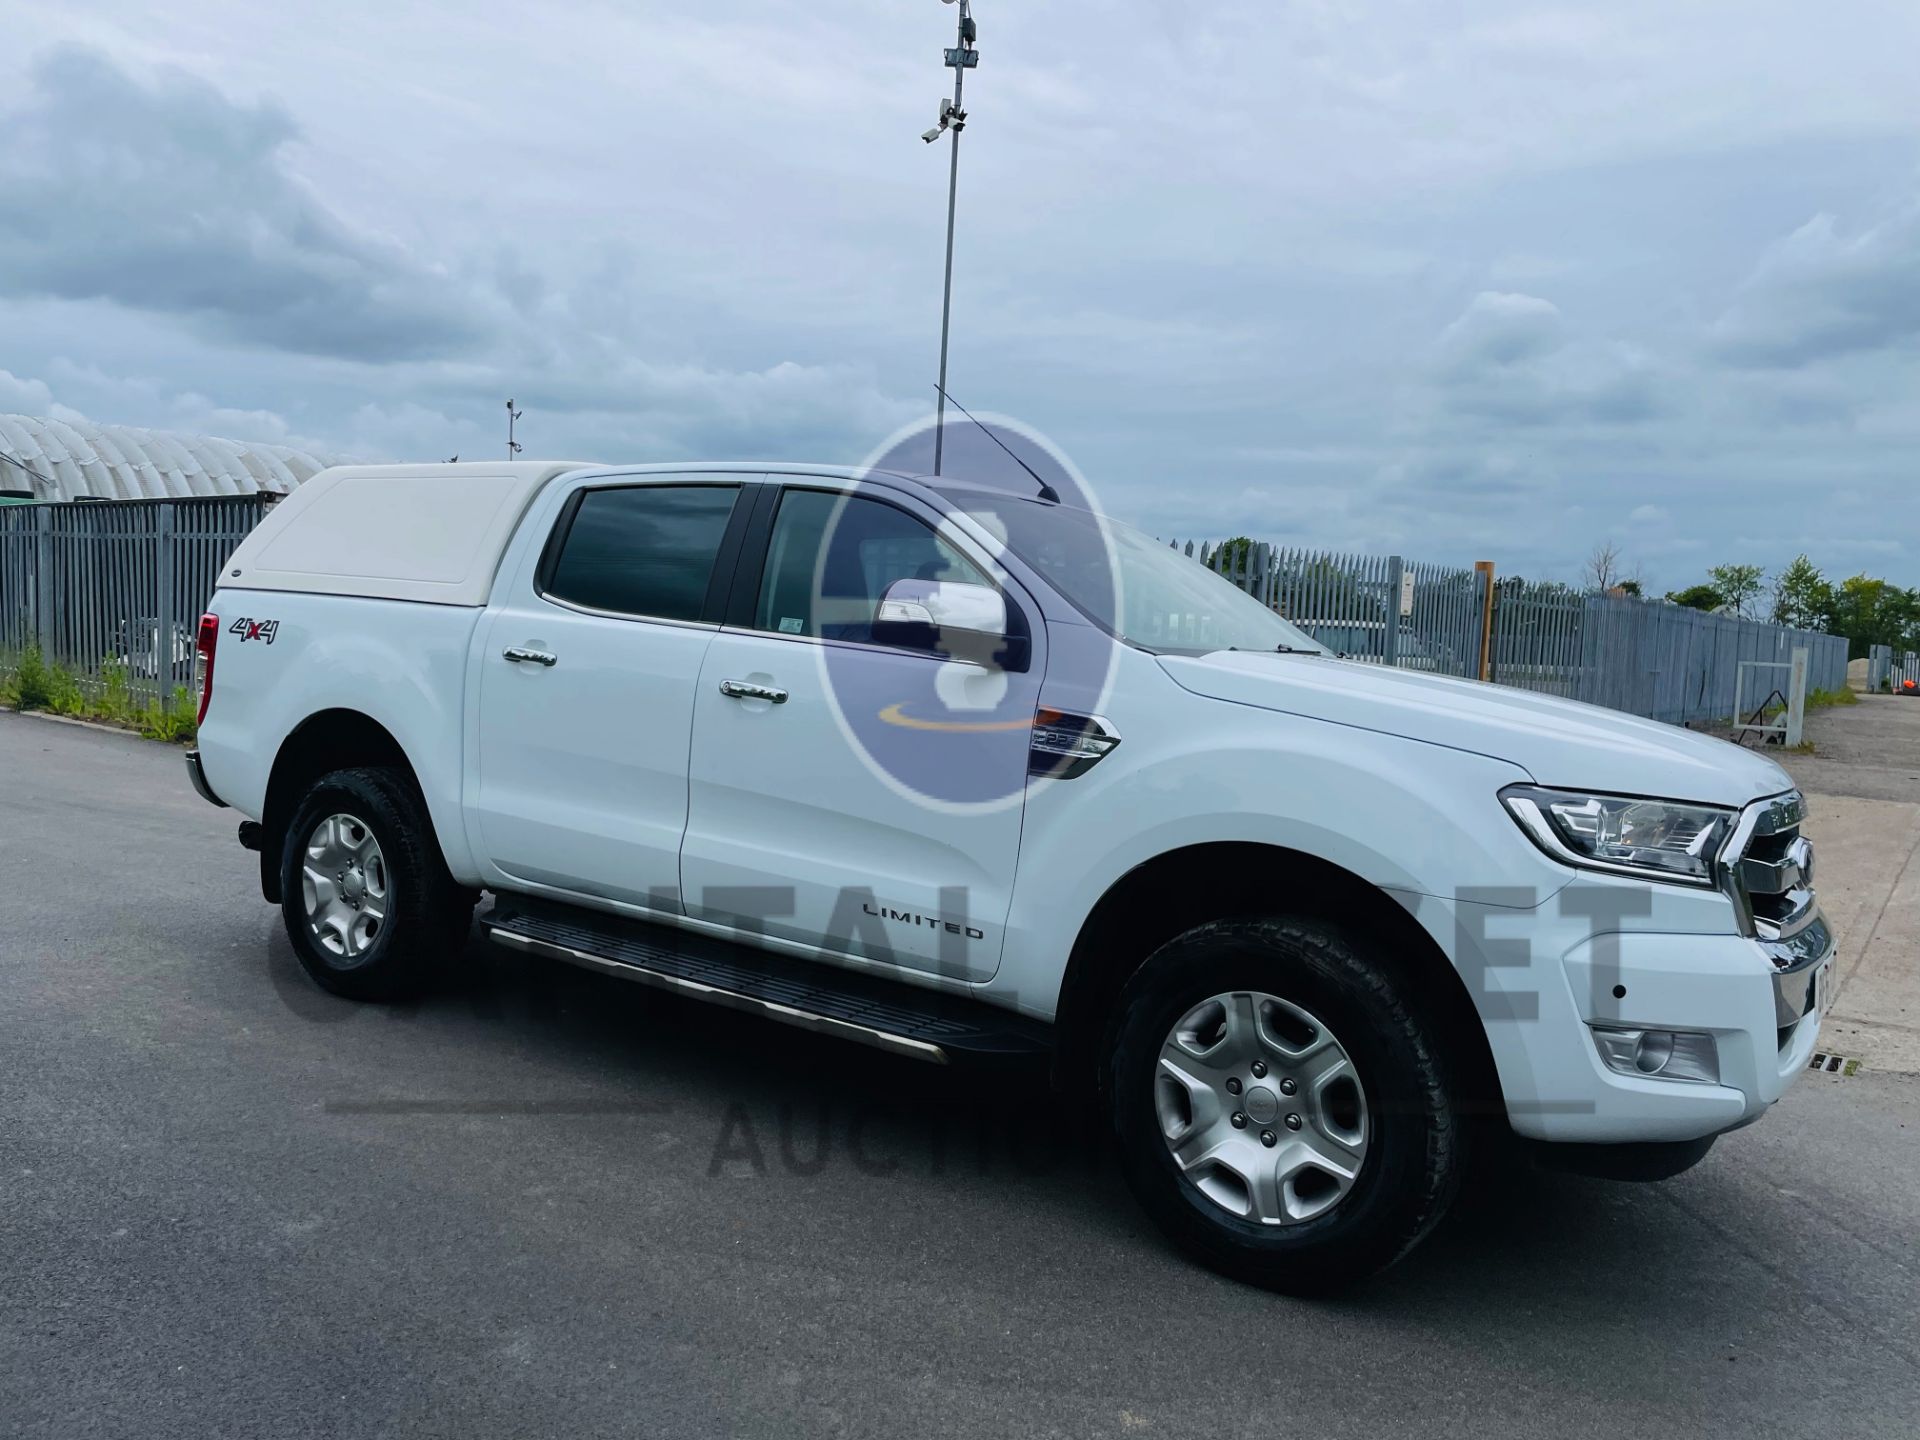 FORD RANGER *LIMITED EDITION* DOUBLE CAB PICK-UP (2018 - EURO 6) 2.2 TDCI - 6 SPEED (1 FORMER OWNER)